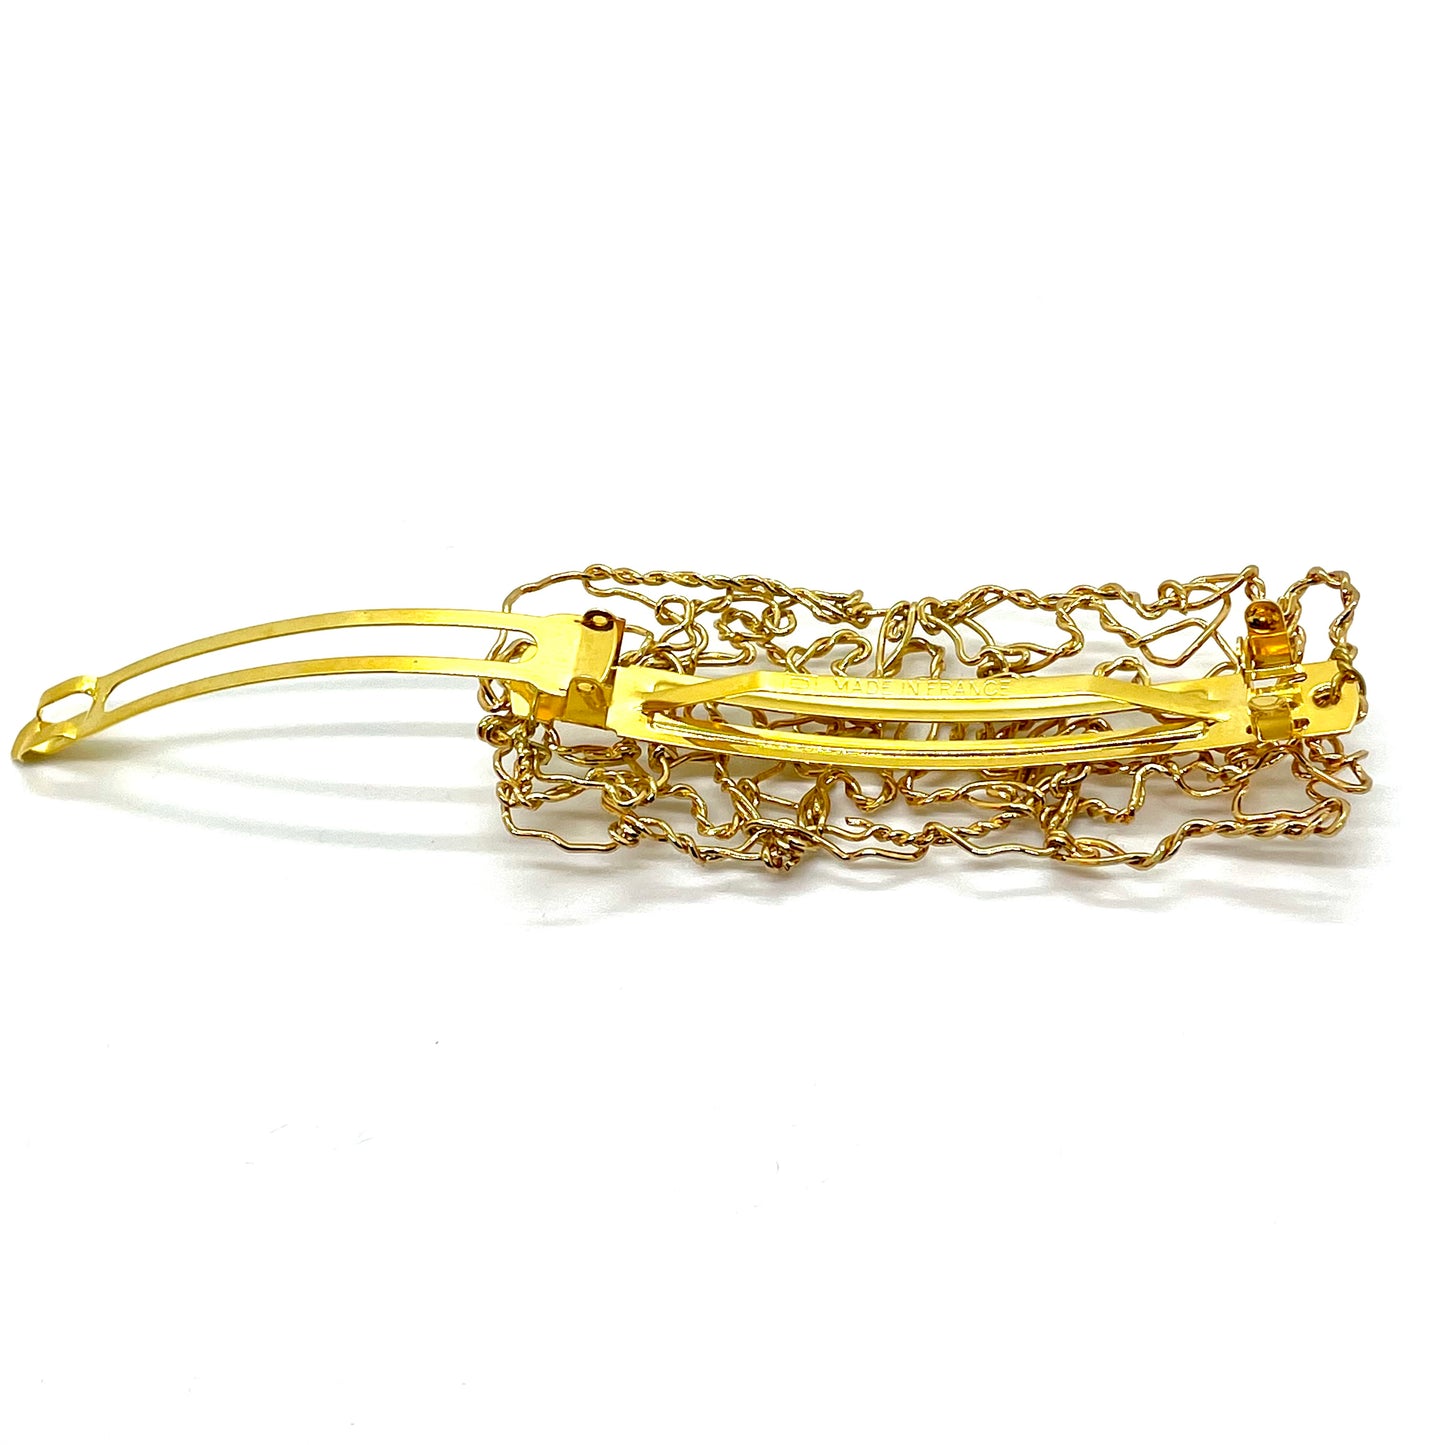 MUSE GOLD hair barrette